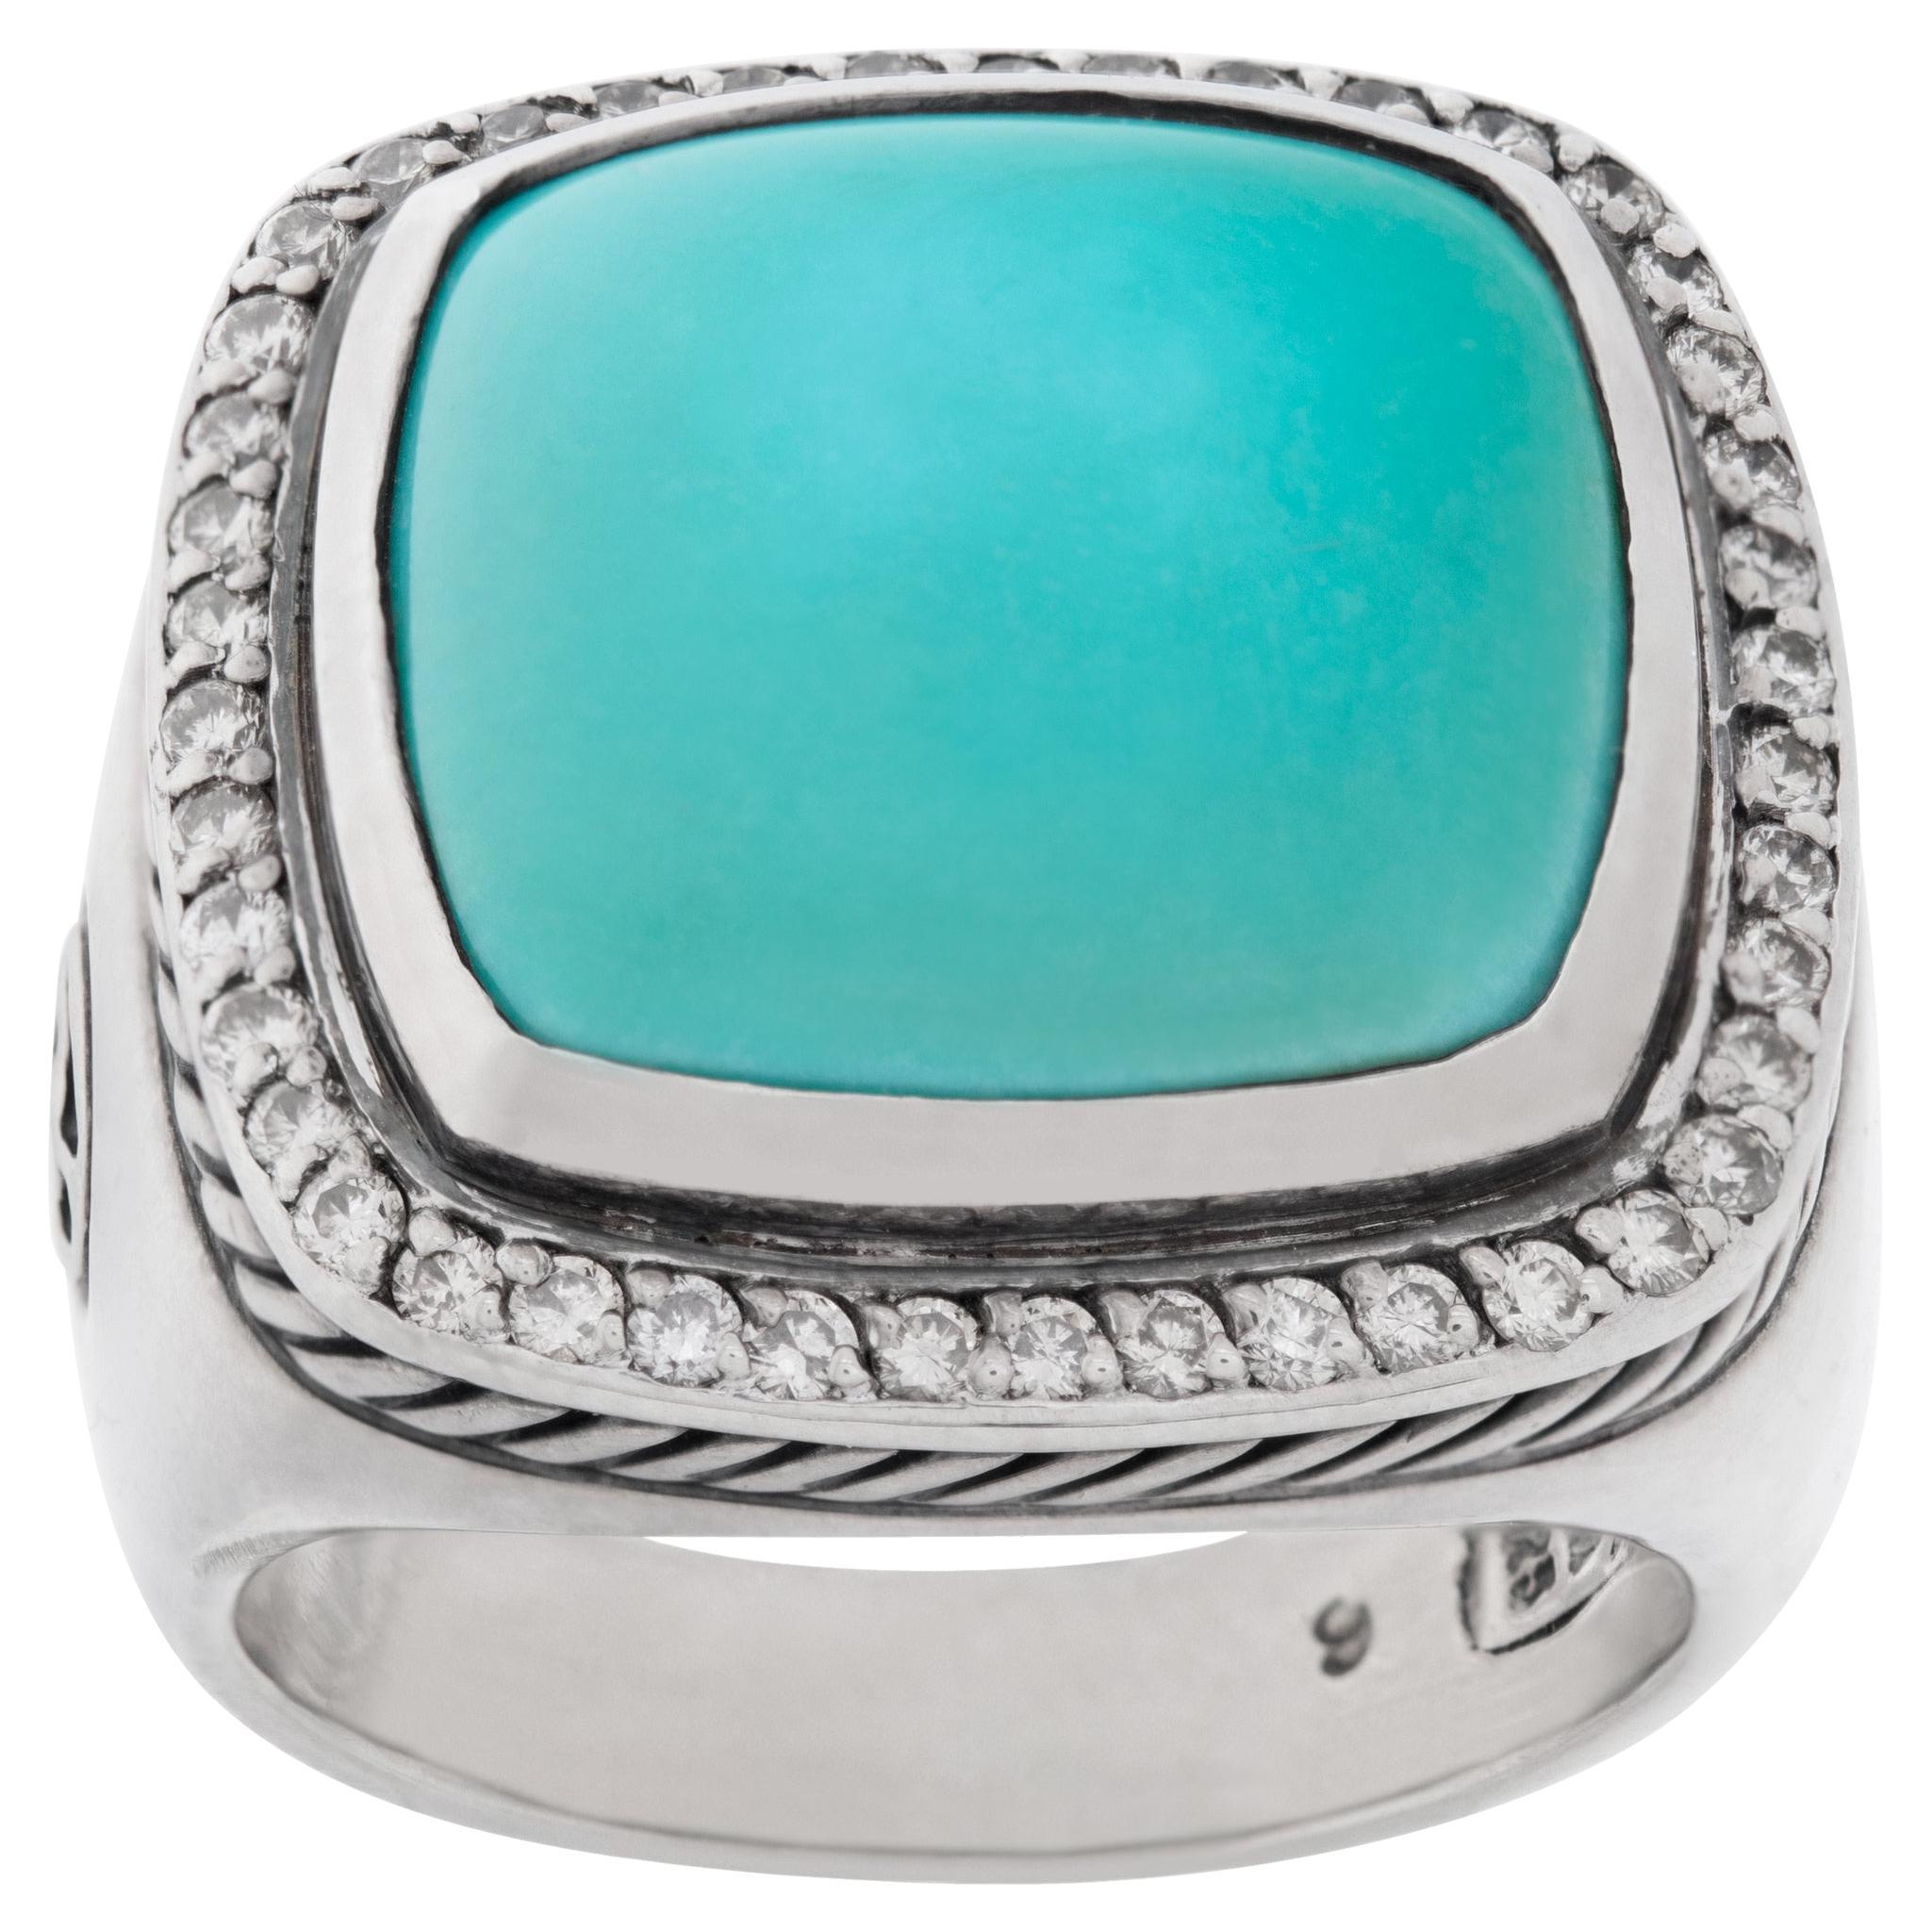 David Yurman Turquoise Albion Ring in Sterling Silver Ring with Diamond Accents